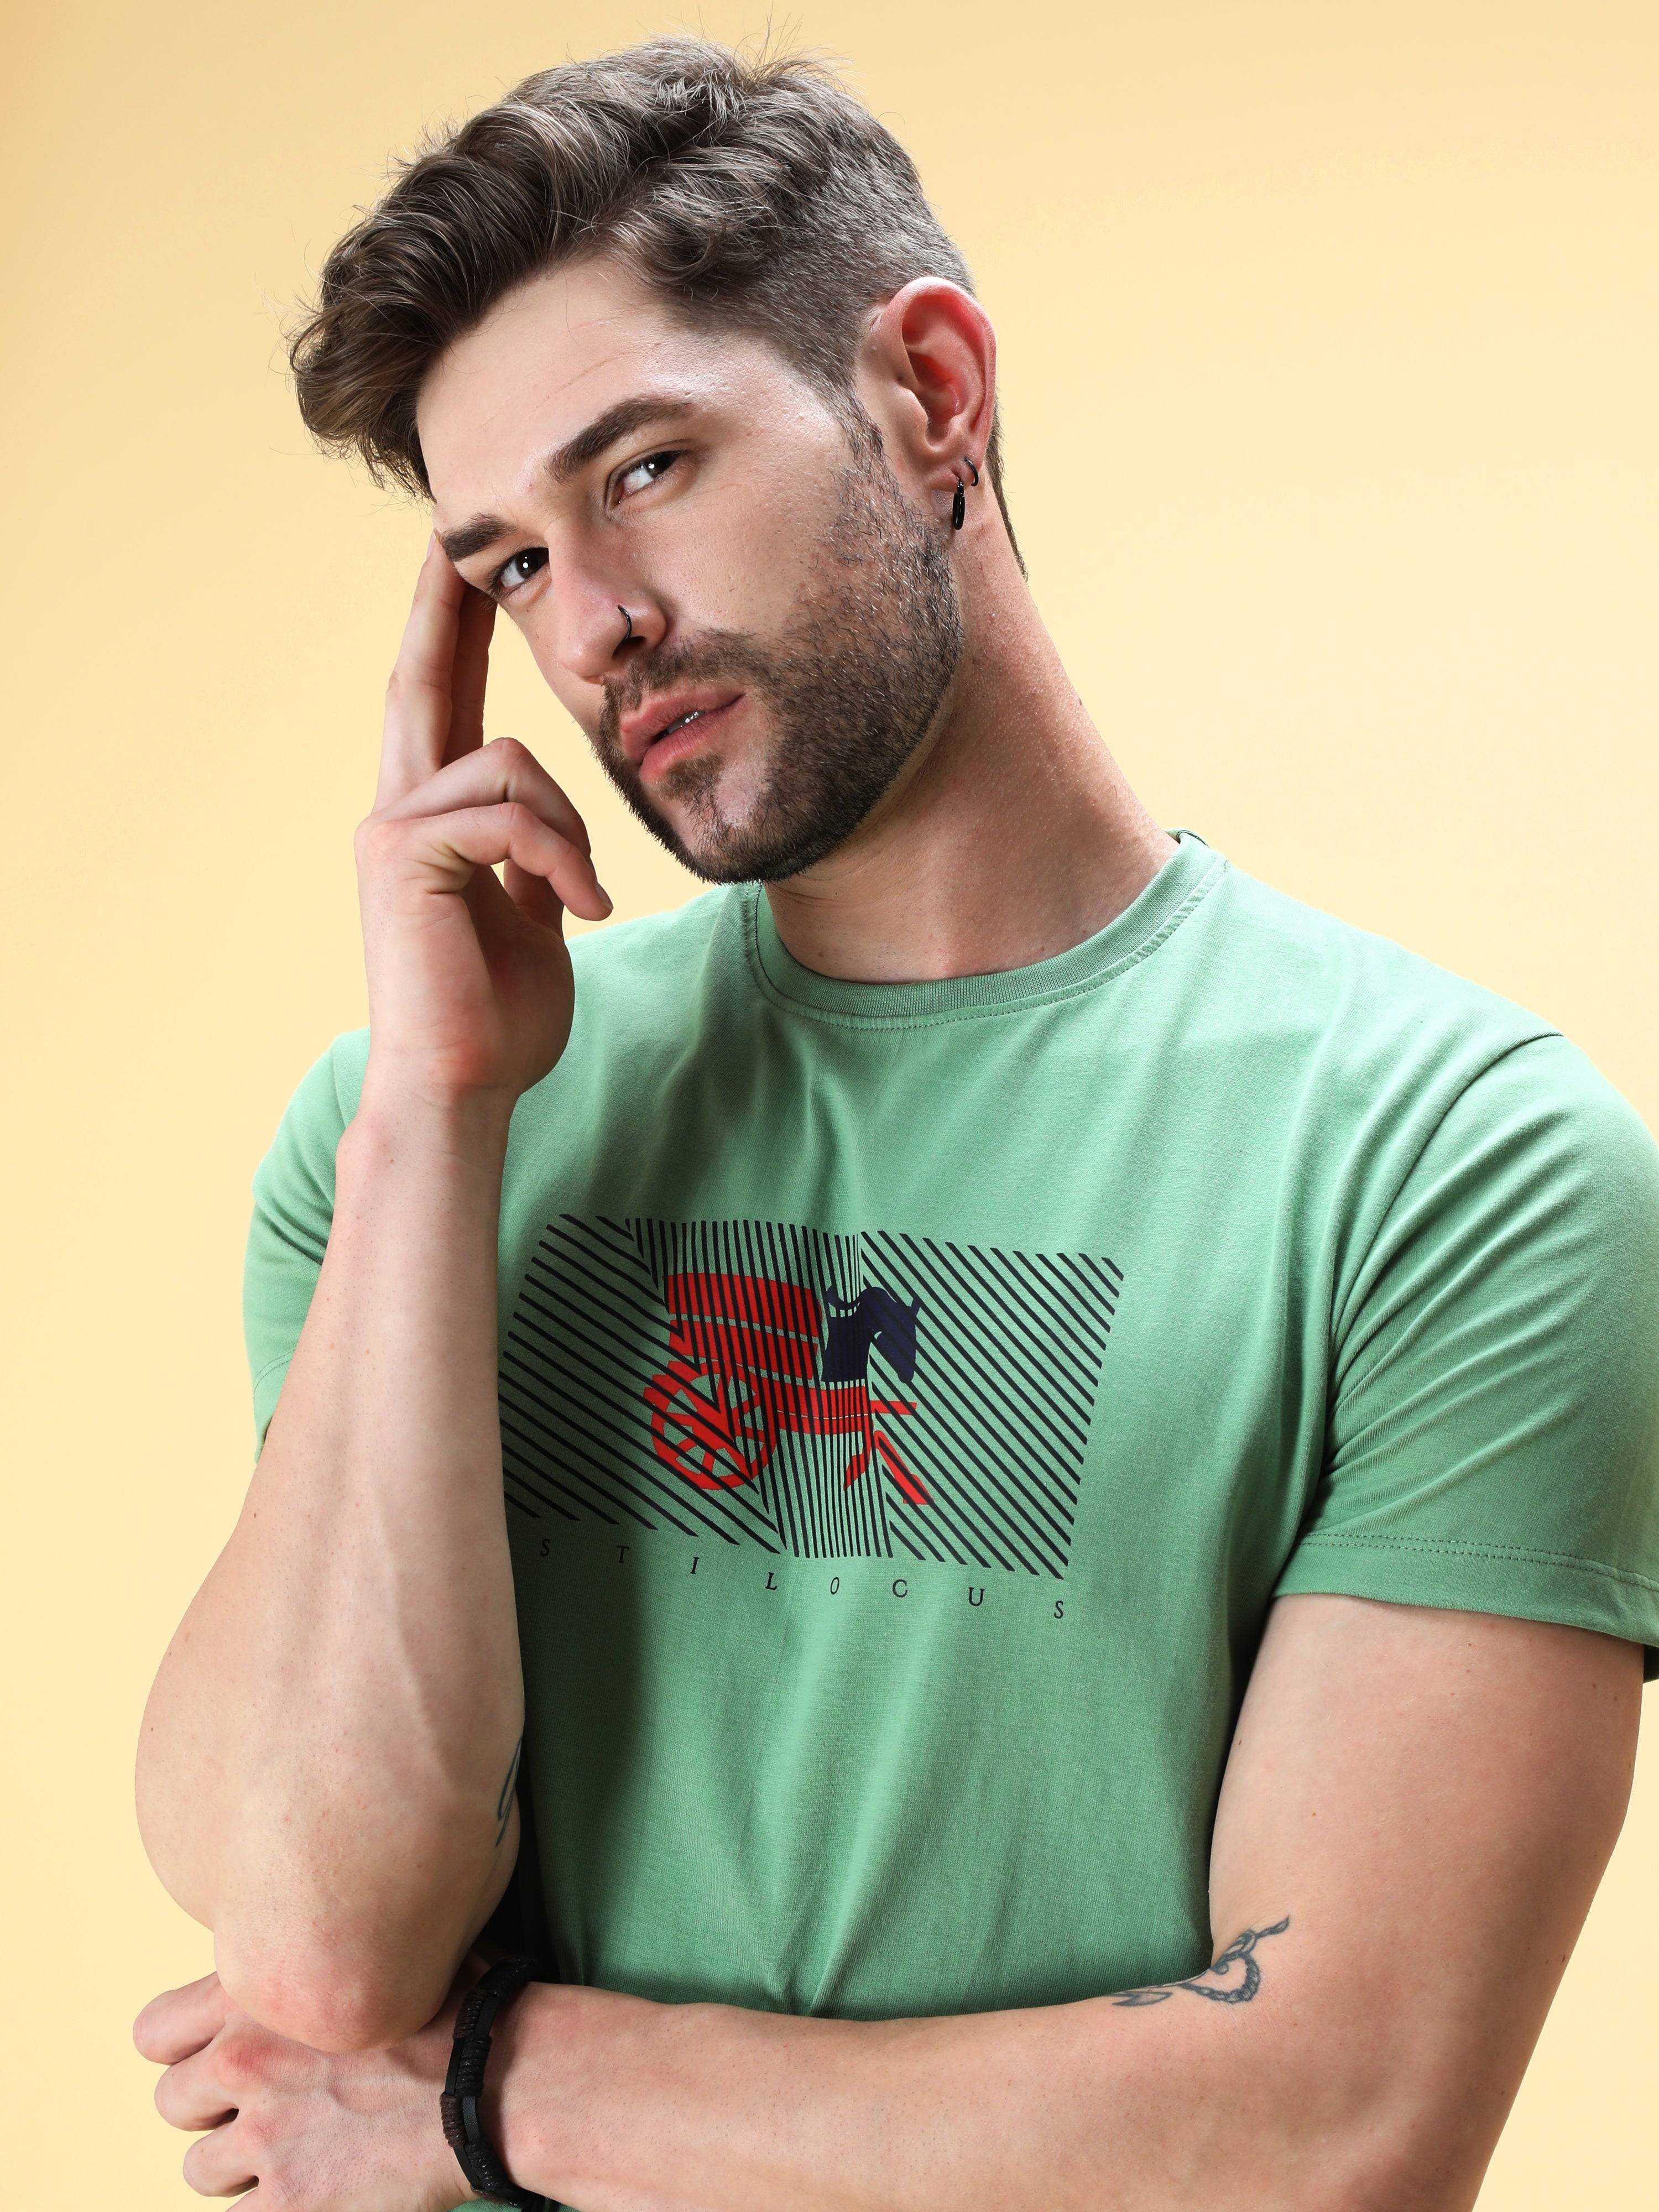 Fern Green Crew Neck T-Shirt shop online at Estilocus. This pure cotton printed T-shirt is a stylish go-to for laidback days. Cut in a comfy regular fit. • 100% Cotton knitted interlock 190GSM• Bio washed fabric• Round neck T-shirt • Half sleeve • Suits t